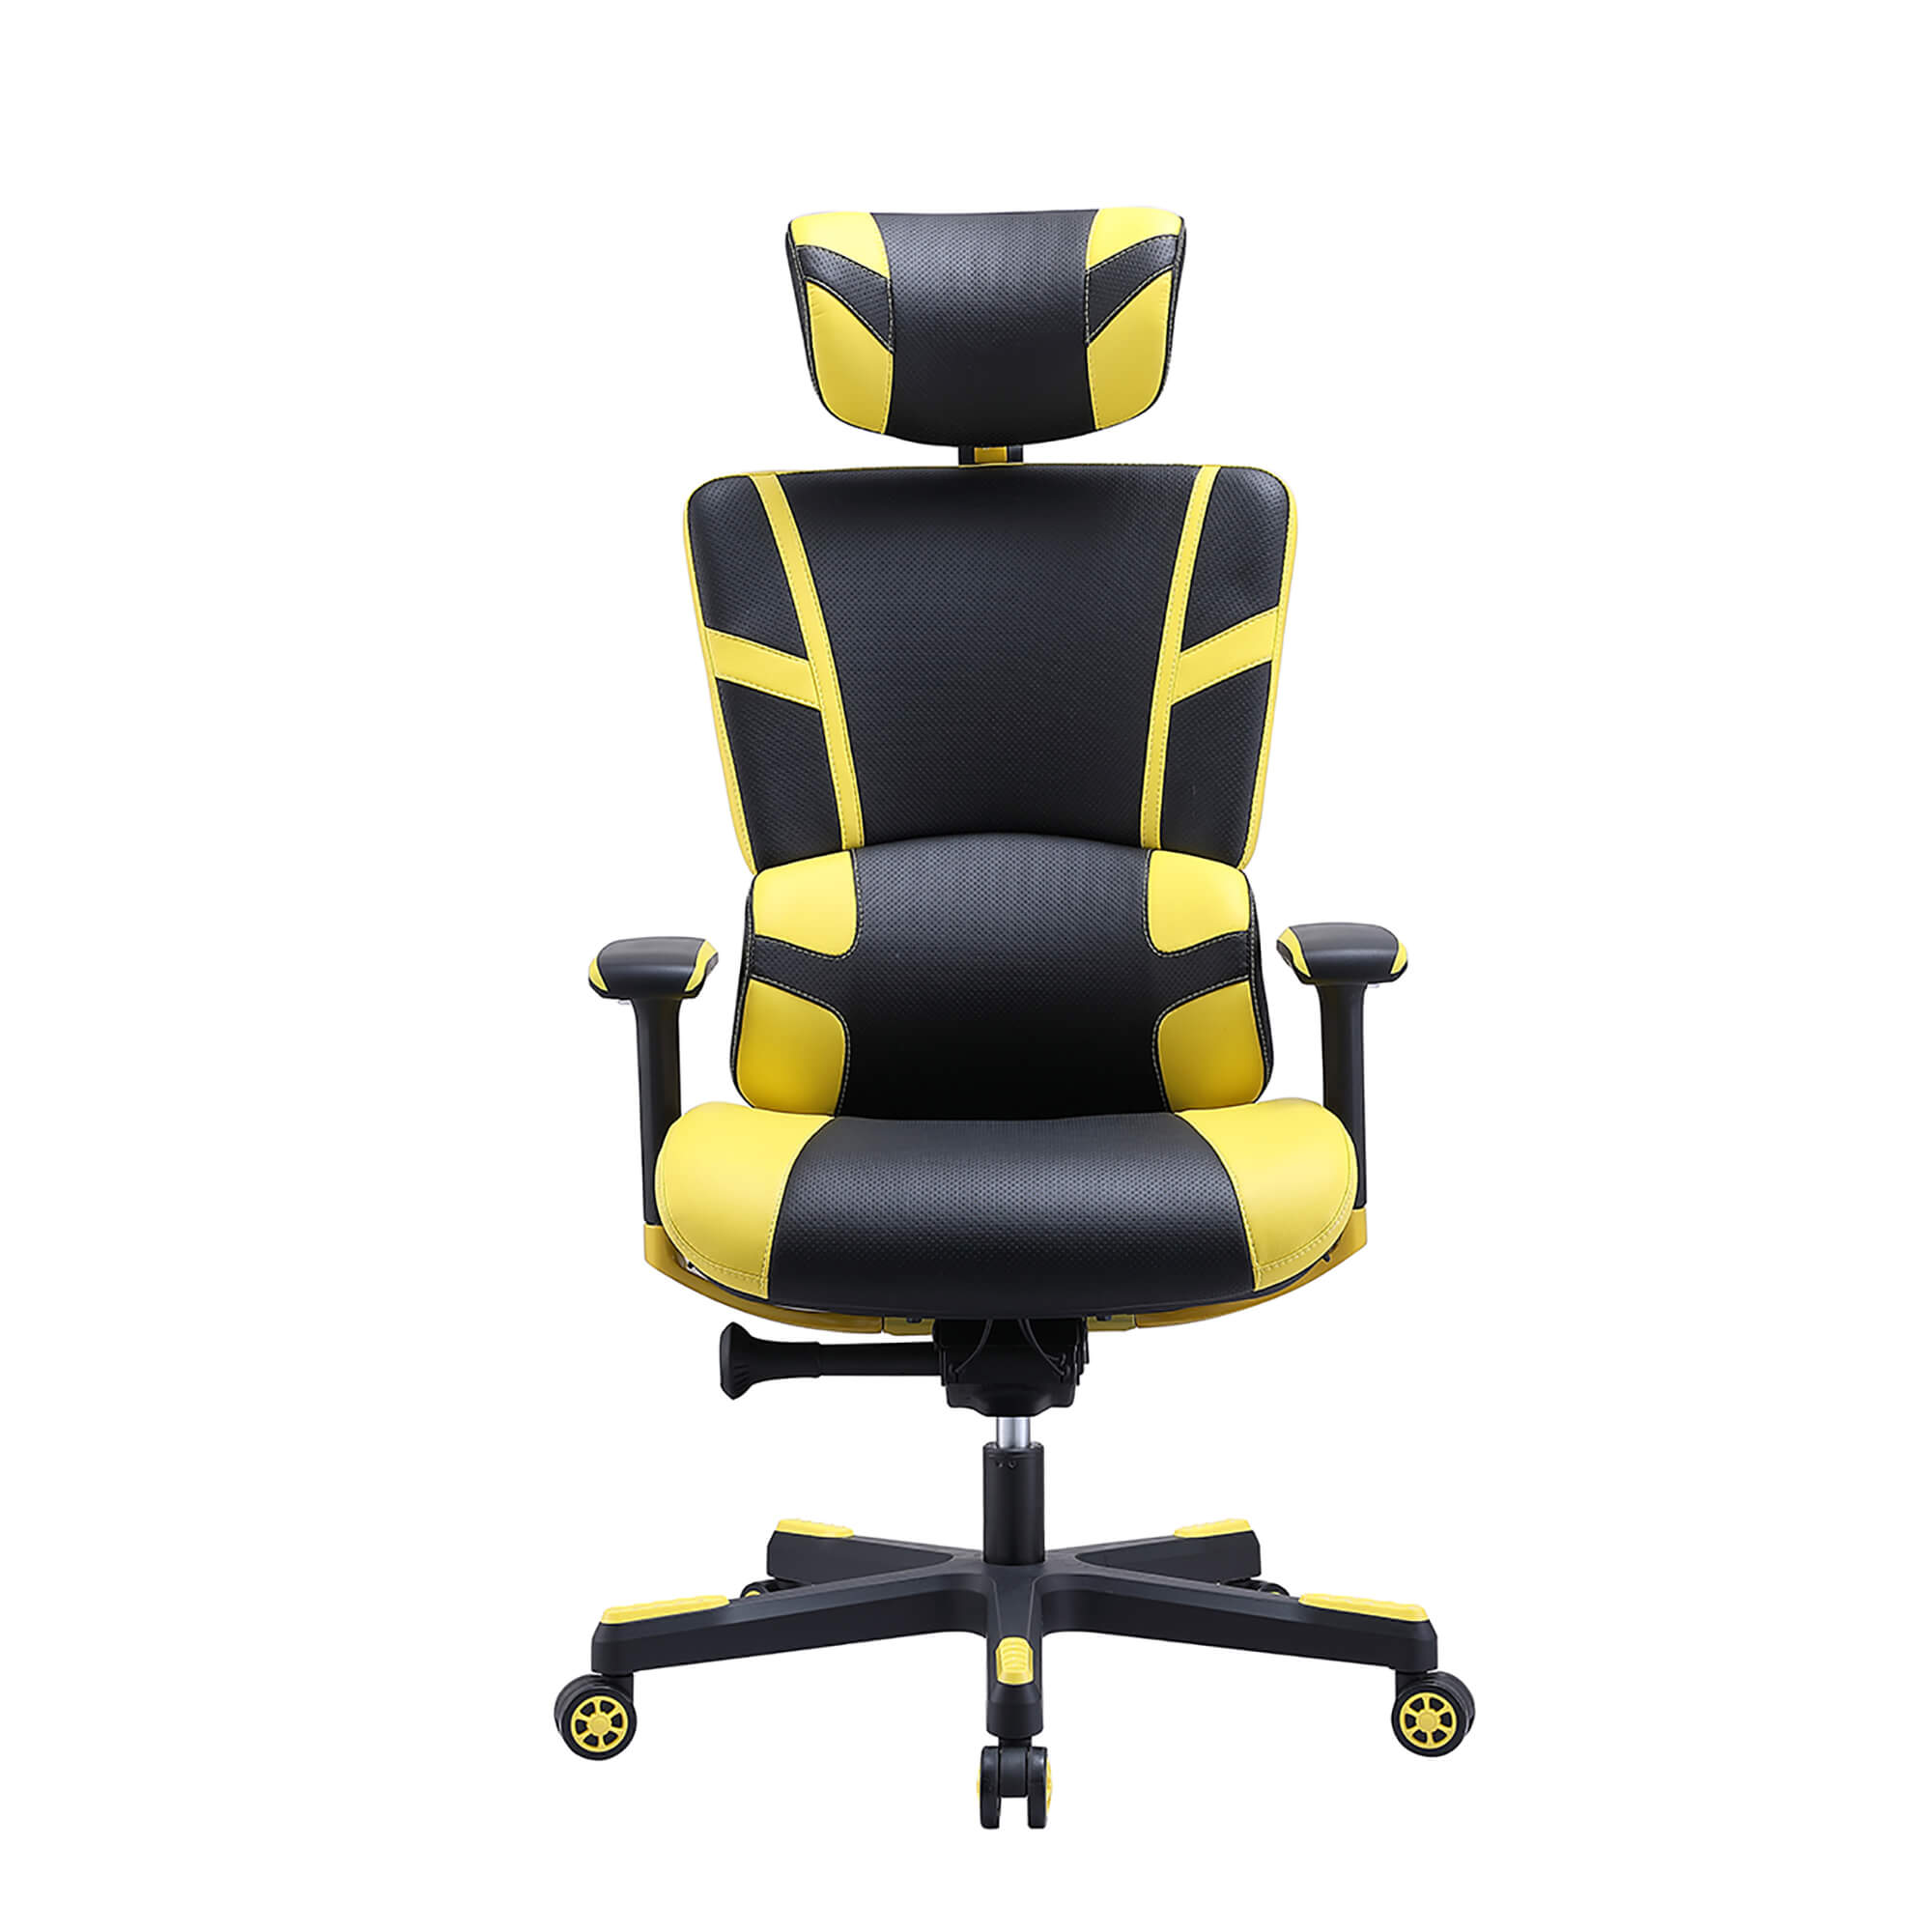 How To Buy An Office Chair Winworld Offers To Buy